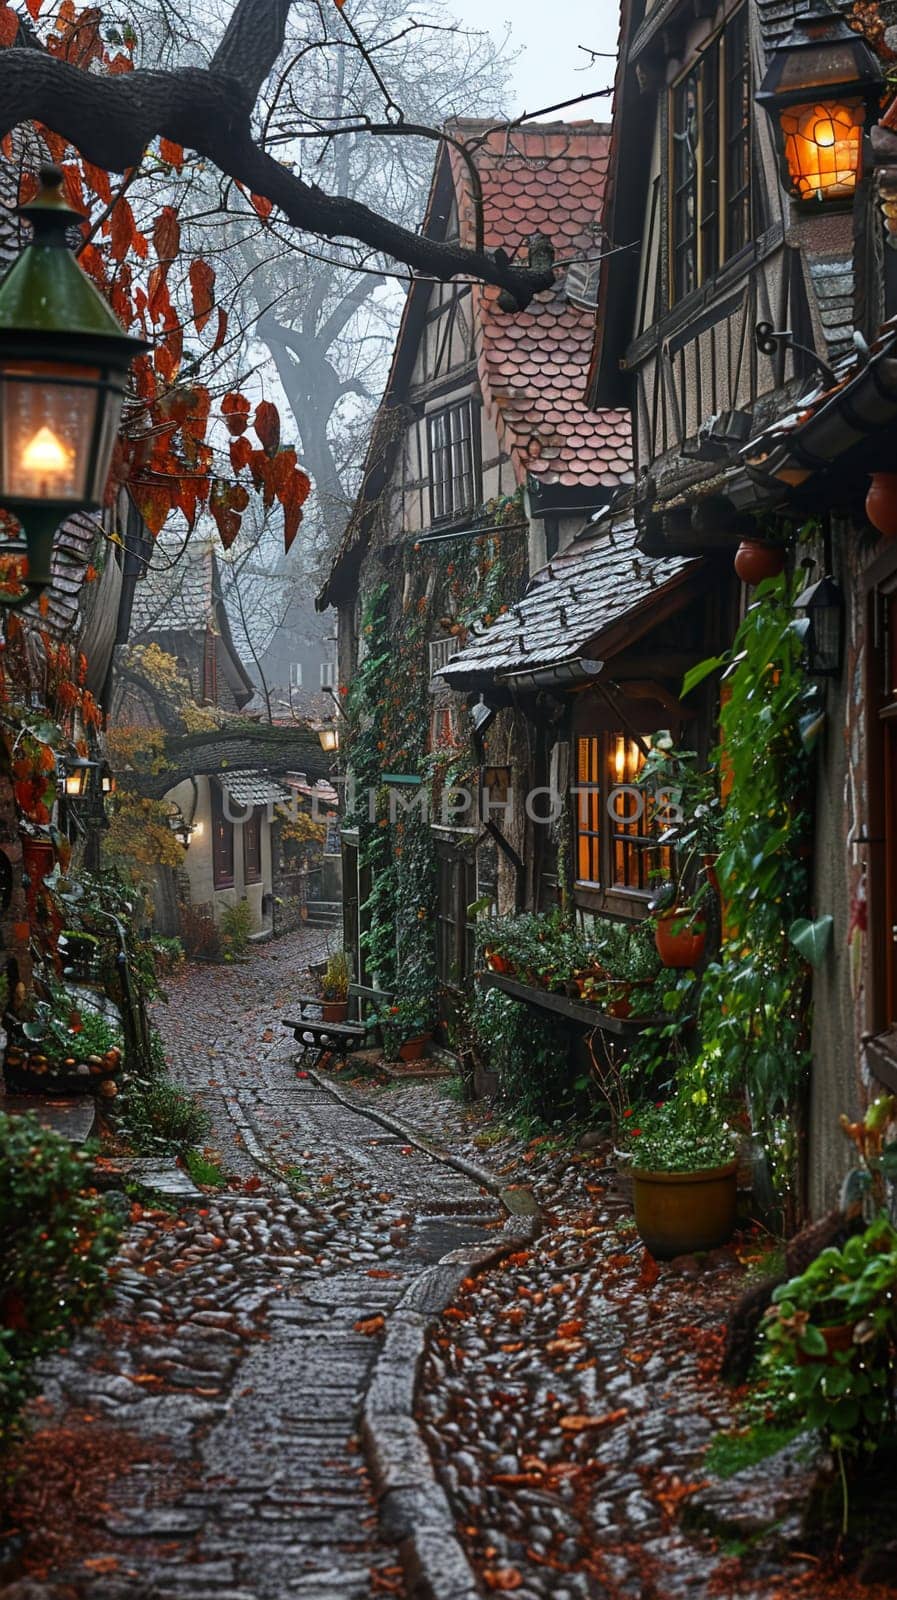 A cobblestone alleyway in an old European town, evoking history and charm.